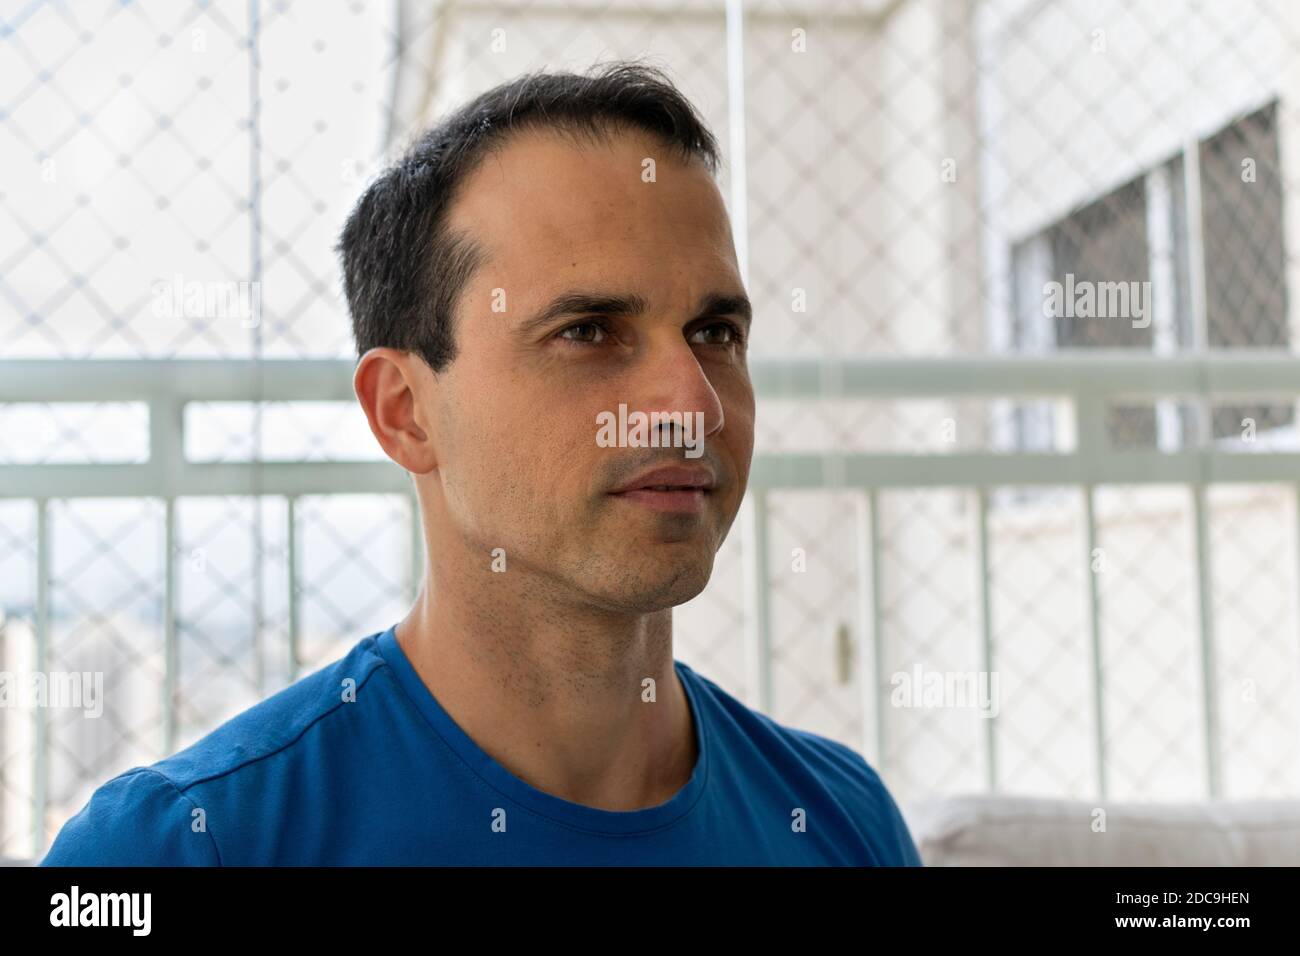 43 year old man in blue shirt looking at the diagonal. Stock Photo